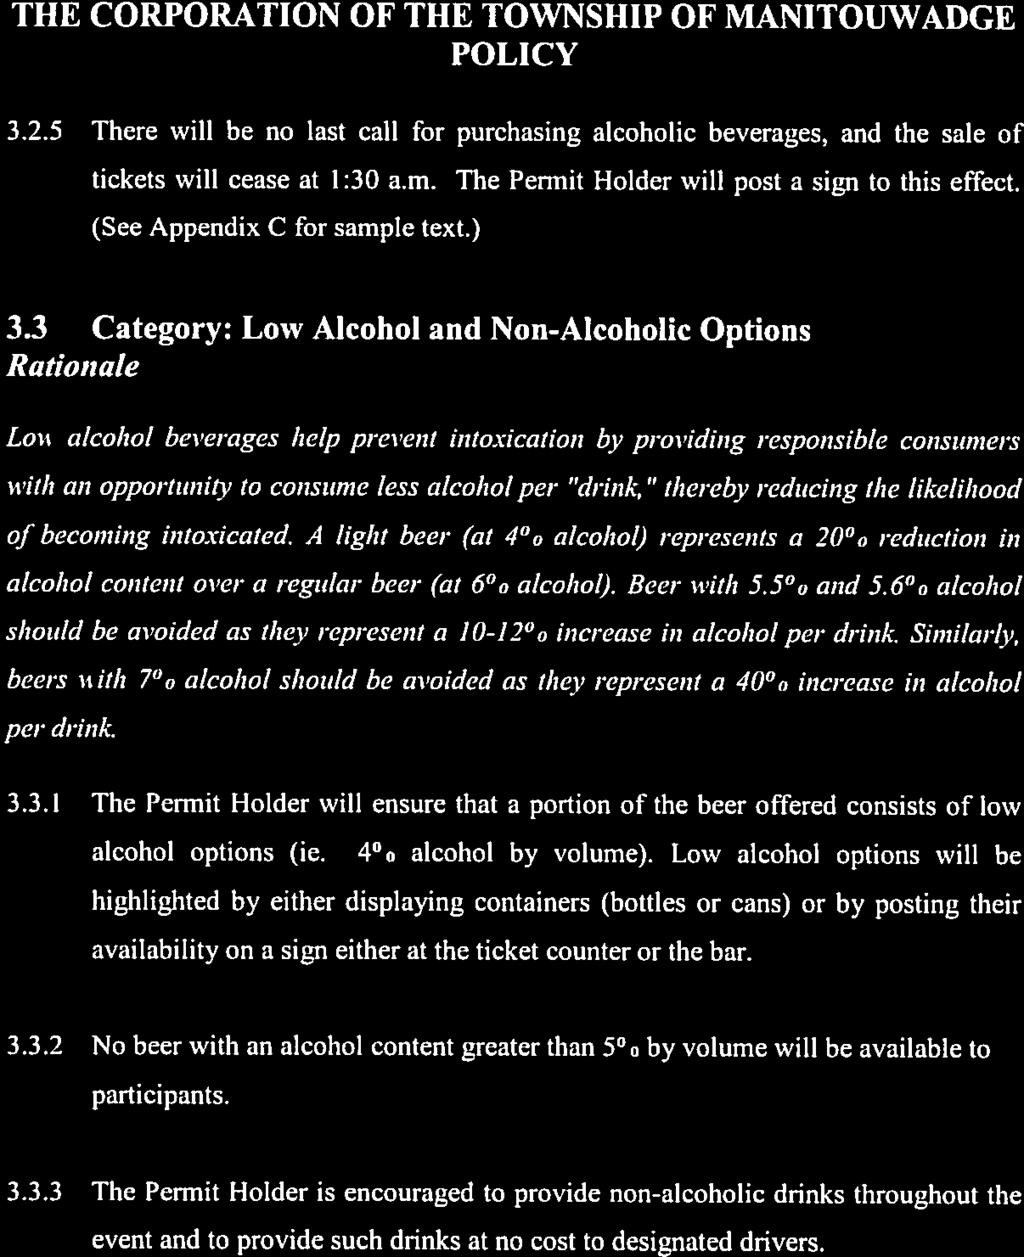 3.2.5 There vi11 be no last call for purchasing alcoholic beverages, and the sale of tickets will cease at 1:30 am. The Permit Holder will post a sign to this effect. (See Appendix C for sample text.